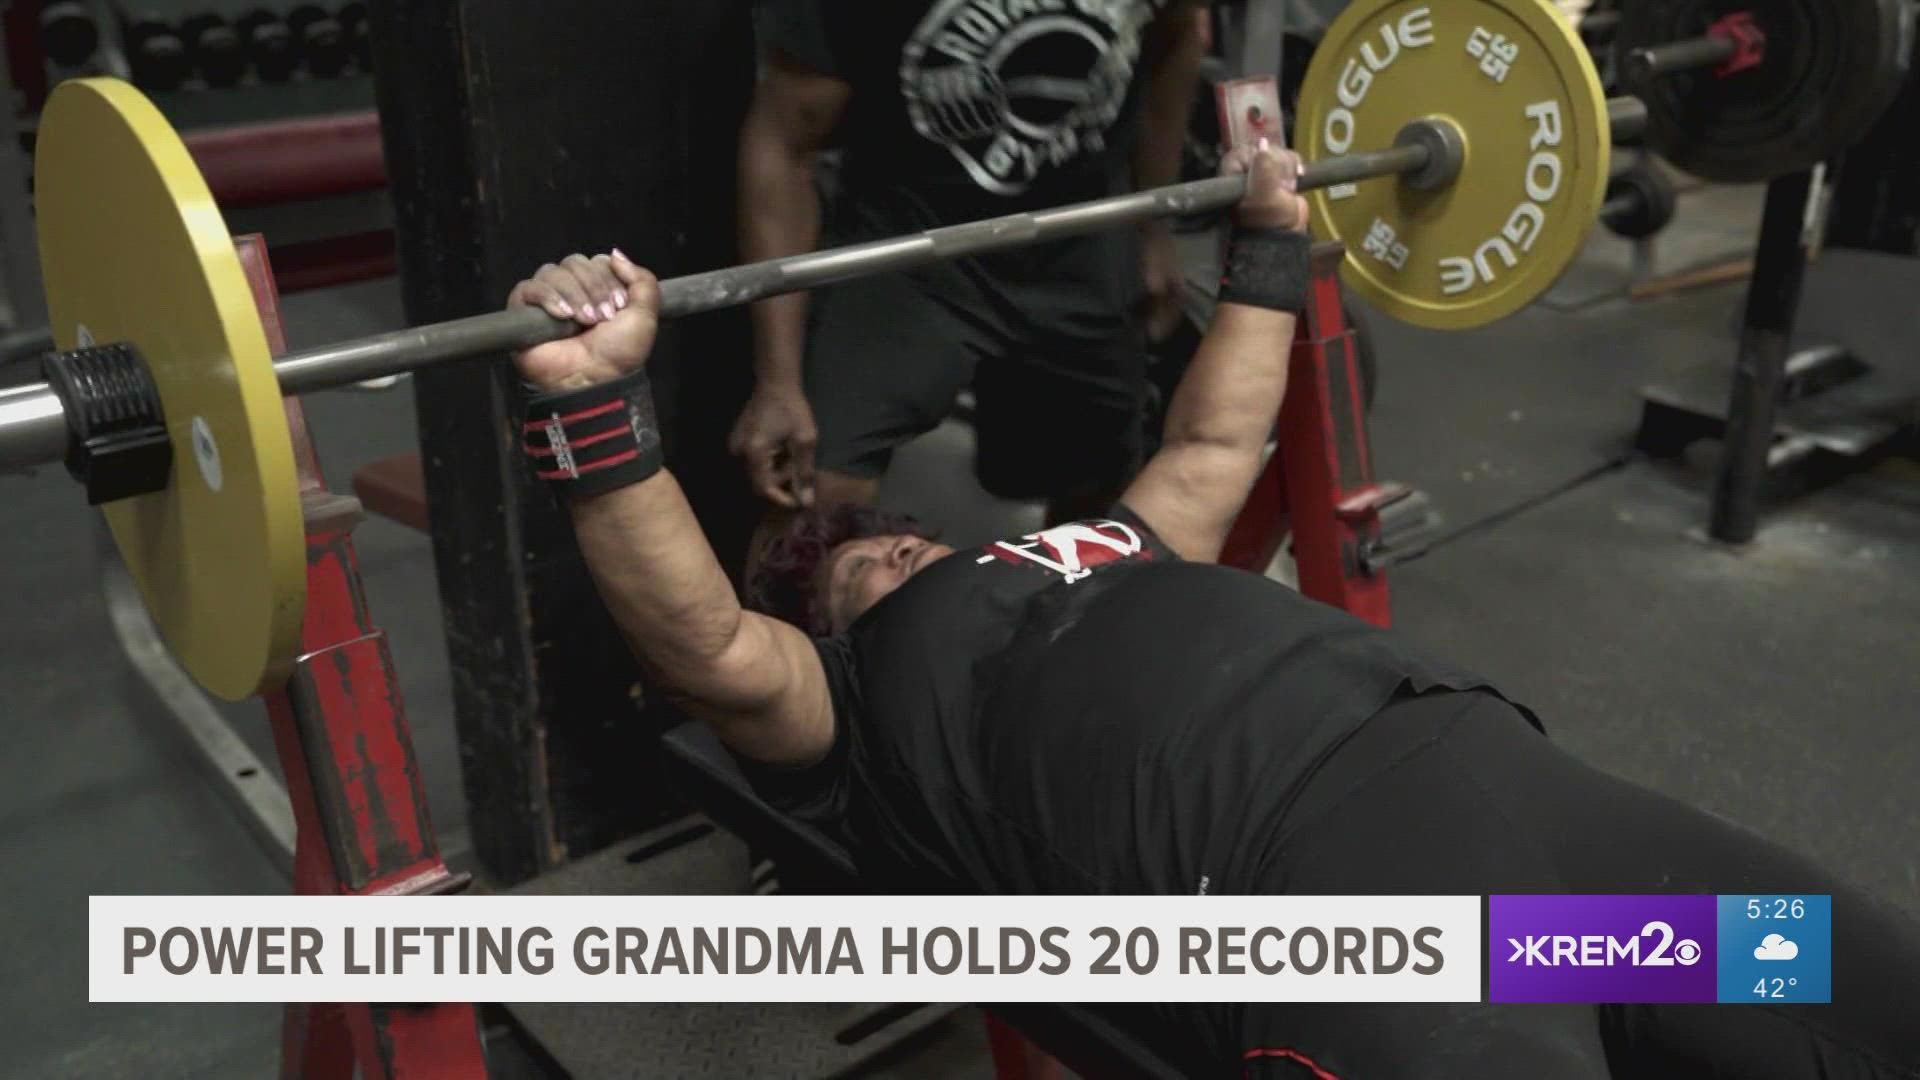 When Nora Langdon turned 65, she headed to her local gym to try her hand at power lifting. Now, 15 years later, she holds more than 20 national and world records.